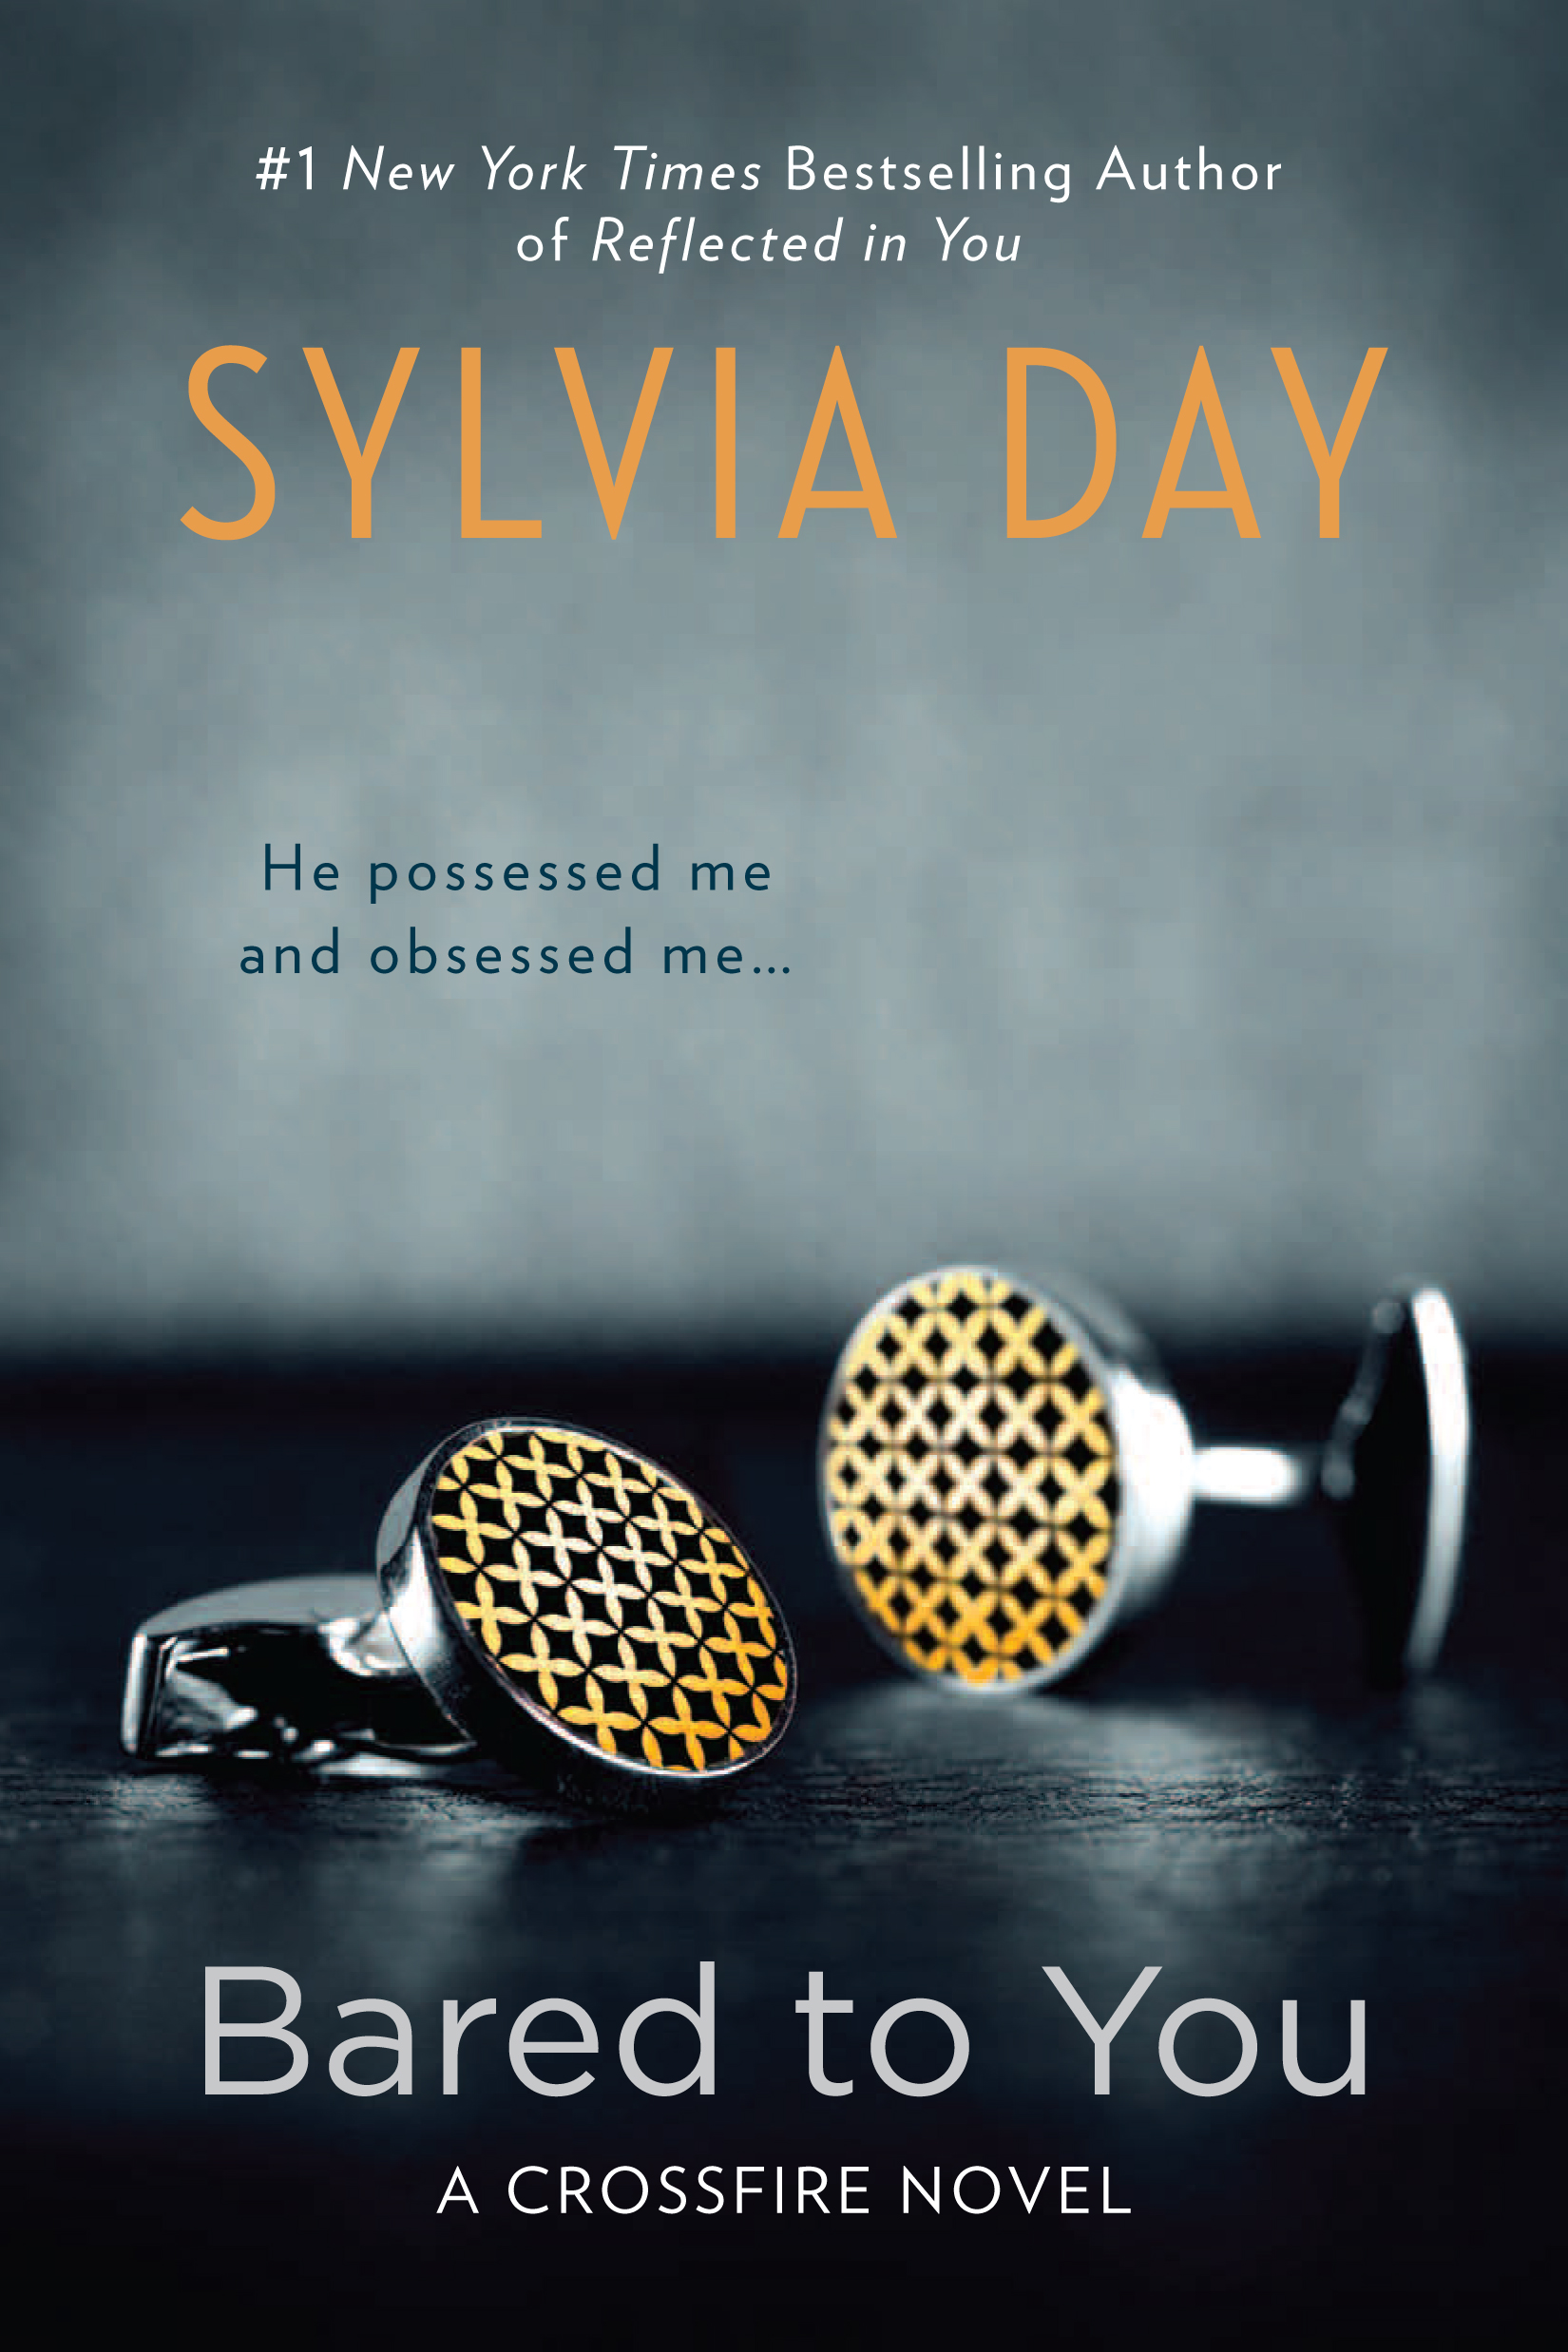 Sylvia Day's Crossfire Series Passes 6 Million Sold